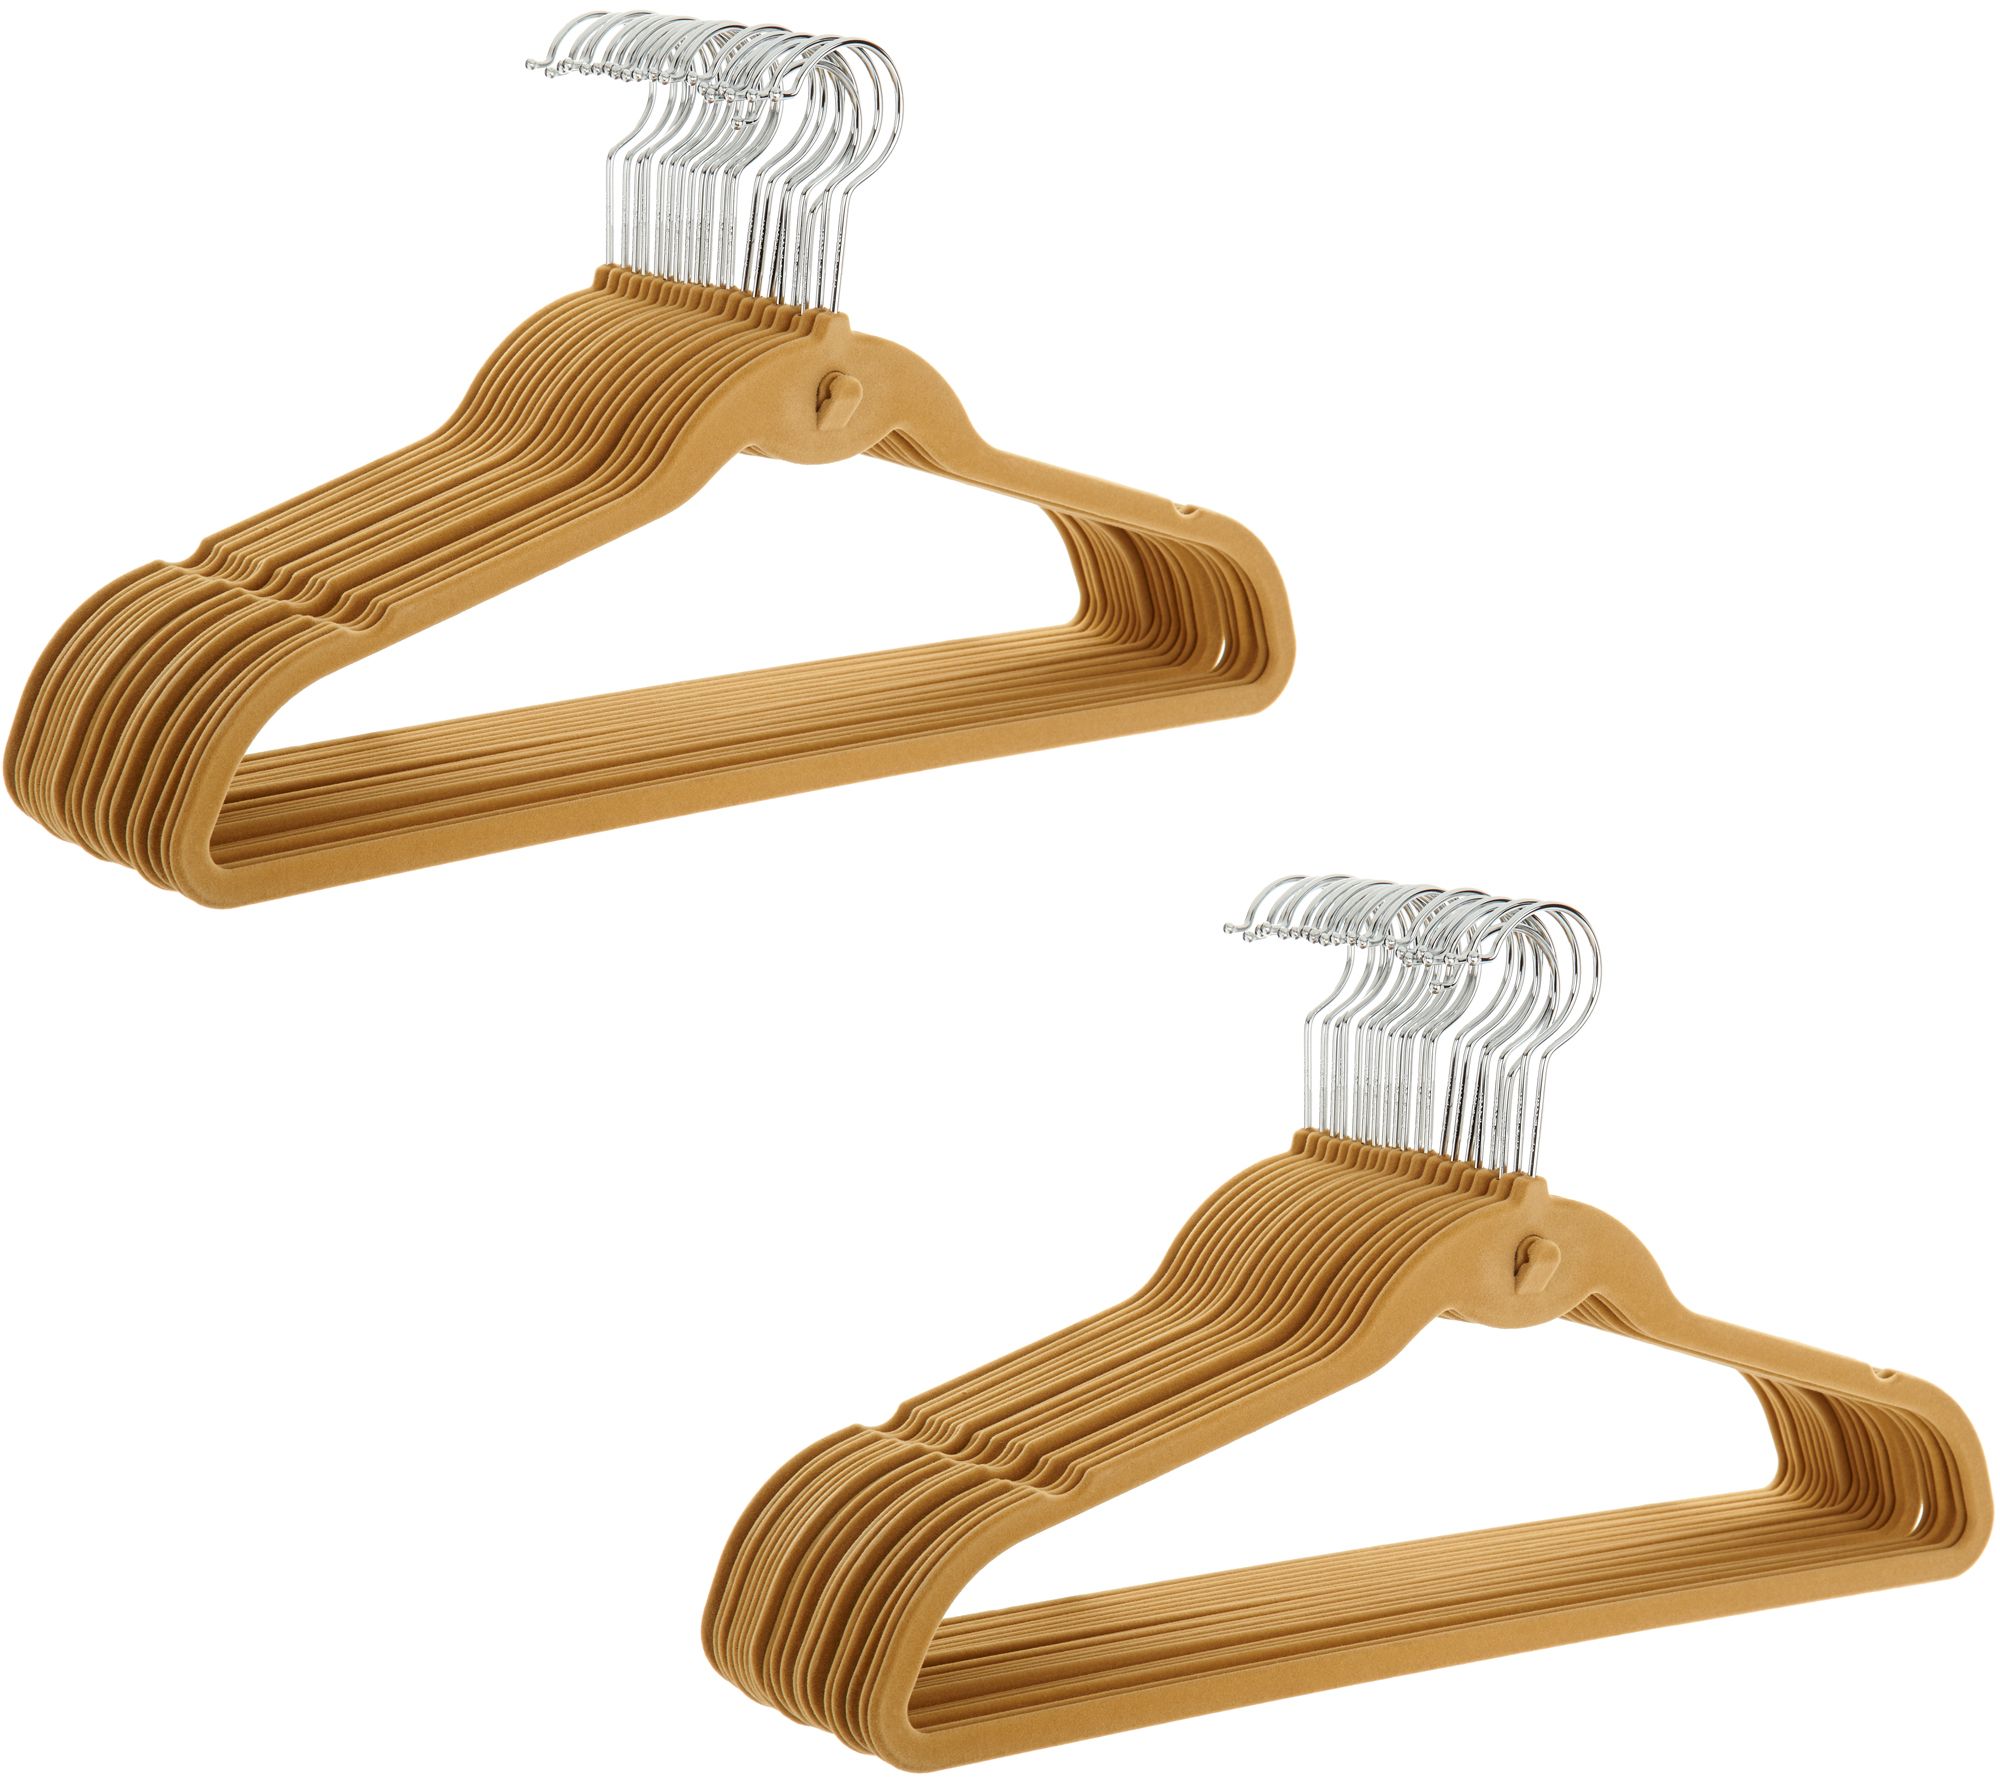 Ruby Space Saving Triangles 108-Pack of Hanger Hooks on QVC 